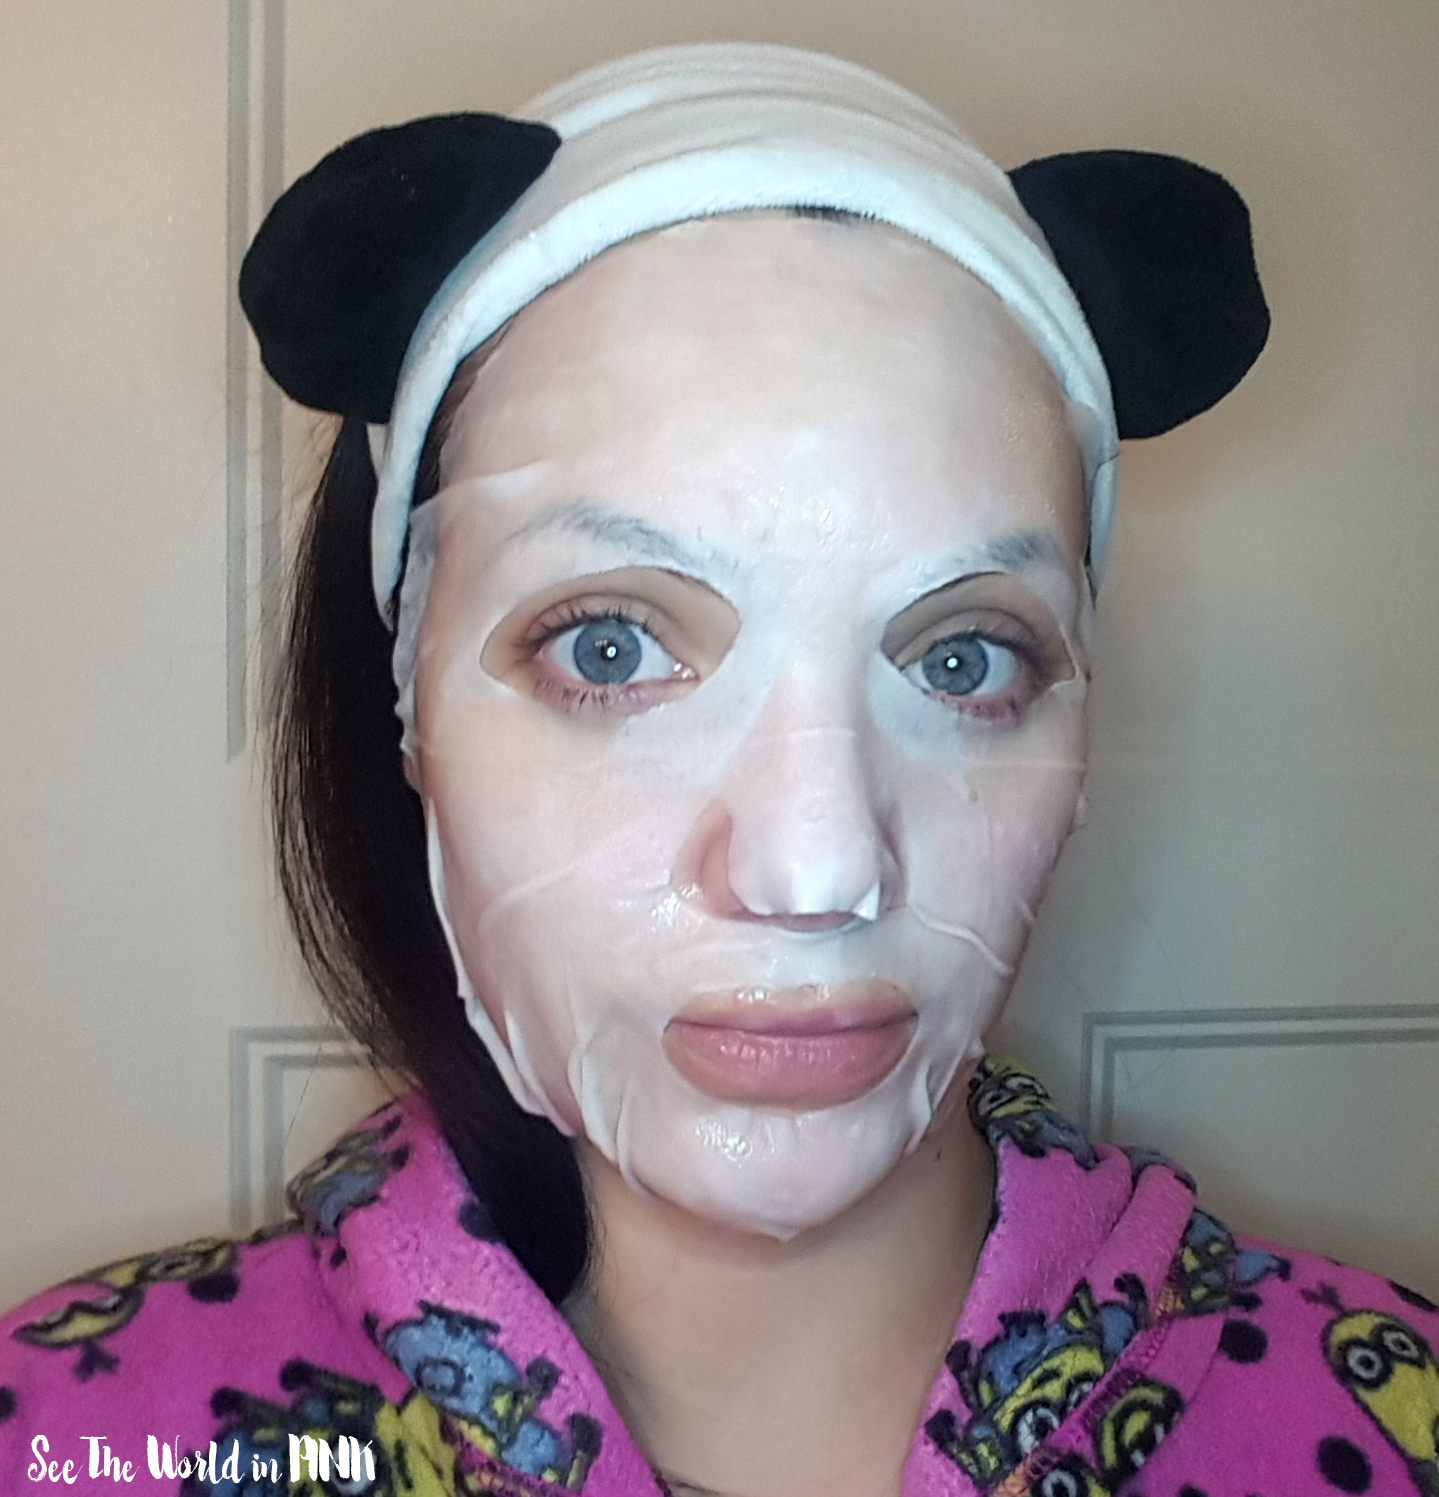 Skincare Sunday #CBBGetsSheetFaced Week Two Recap with Reviews - TheFaceShop, HiddenCos, Etude House and Soo AE